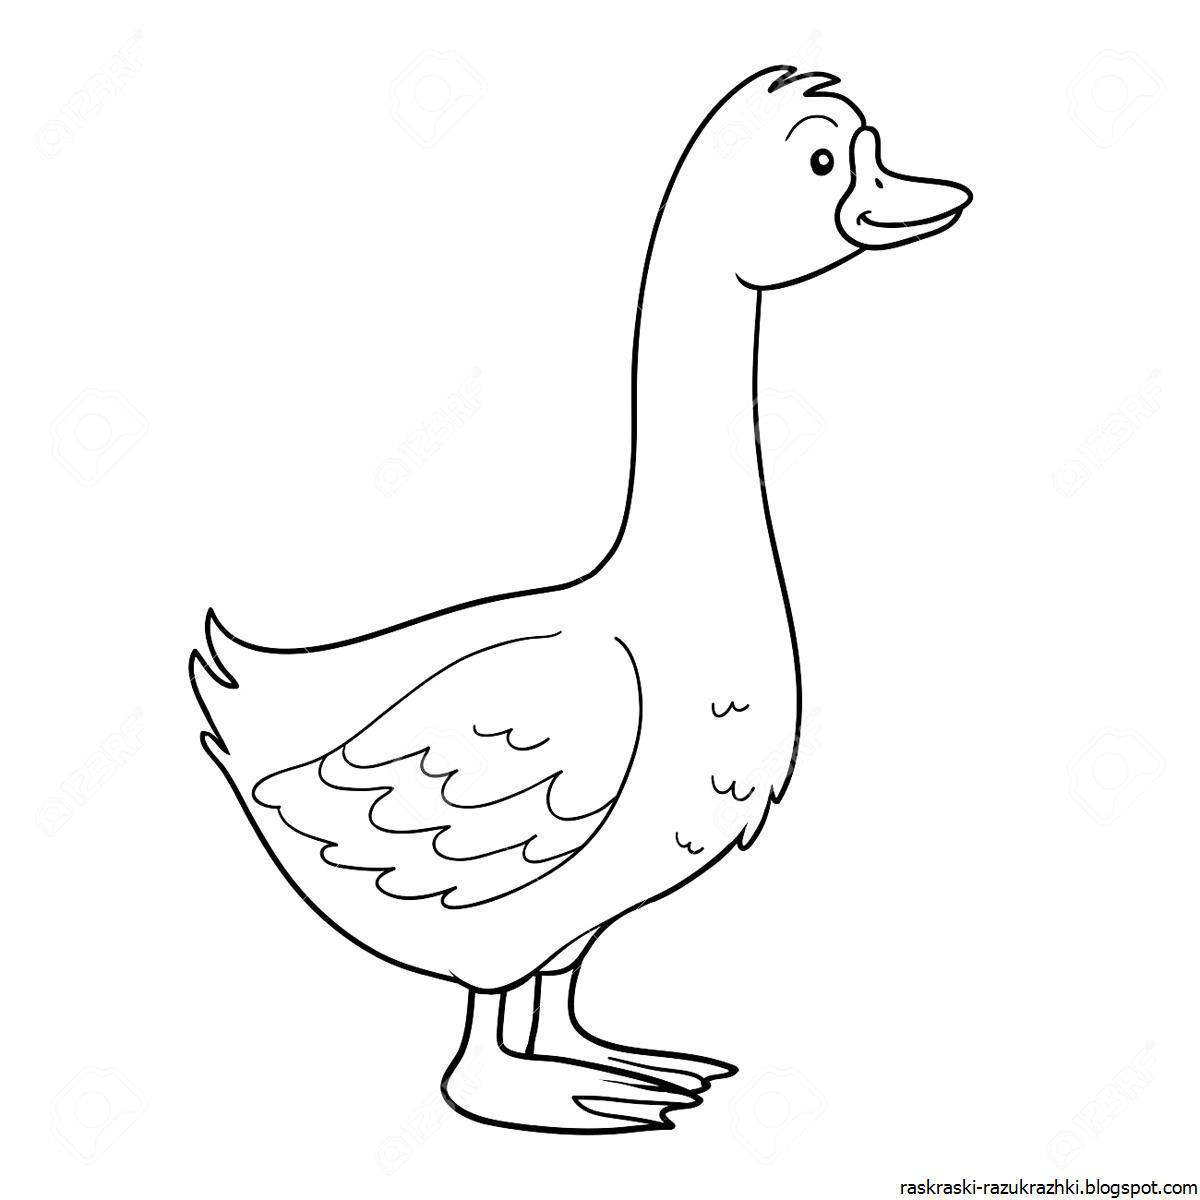 Playful goose coloring page for kids